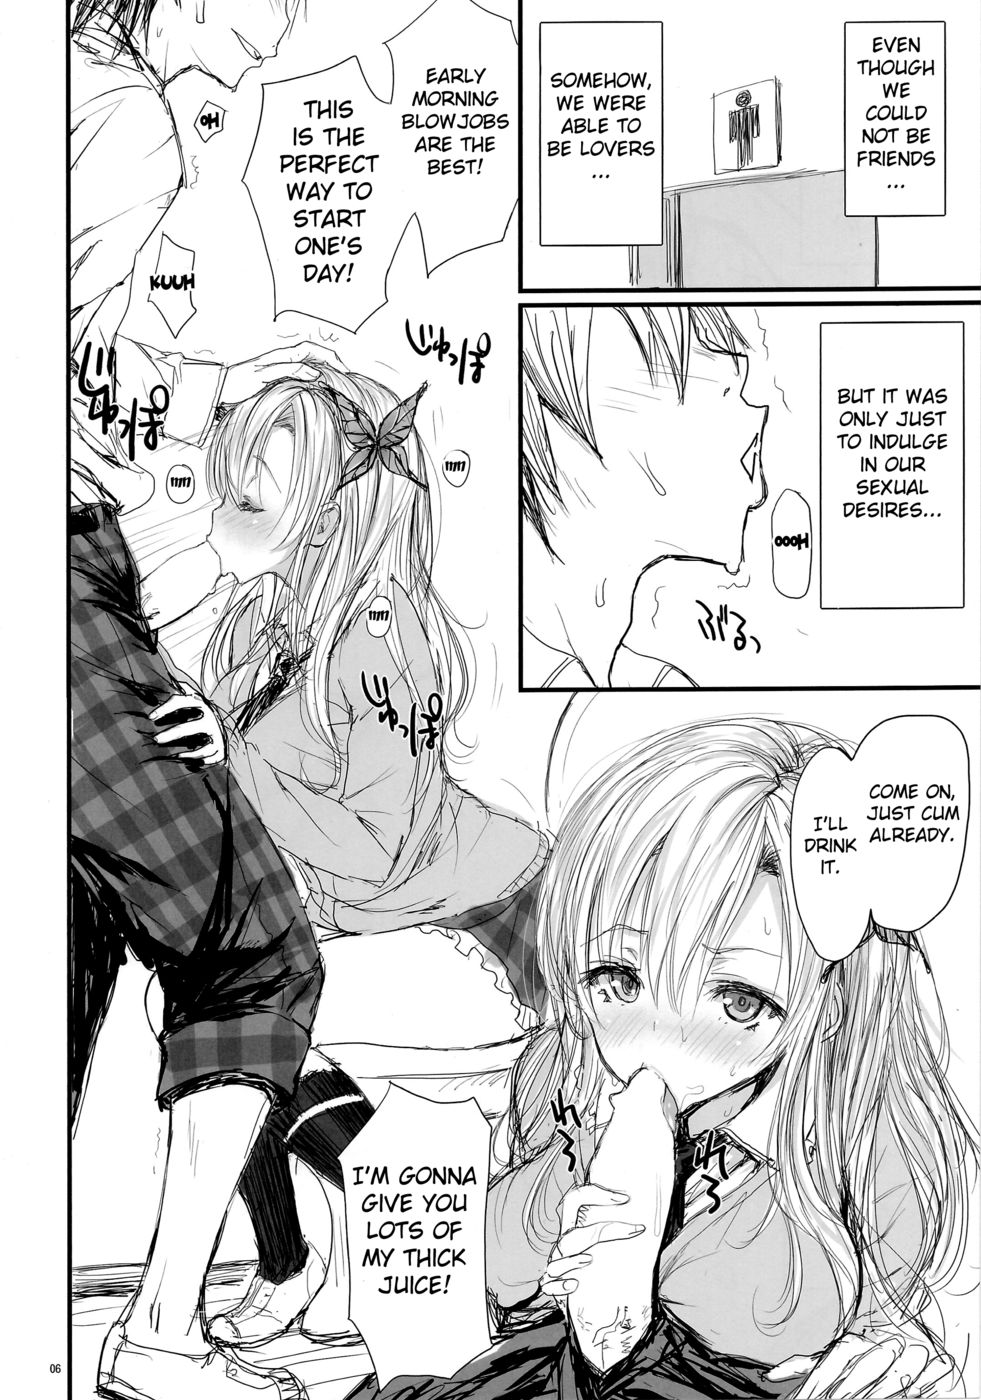 Hentai Manga Comic-Angels stroke 74 Meat x Meat, Meat and Wild Carnal Desires-Read-7